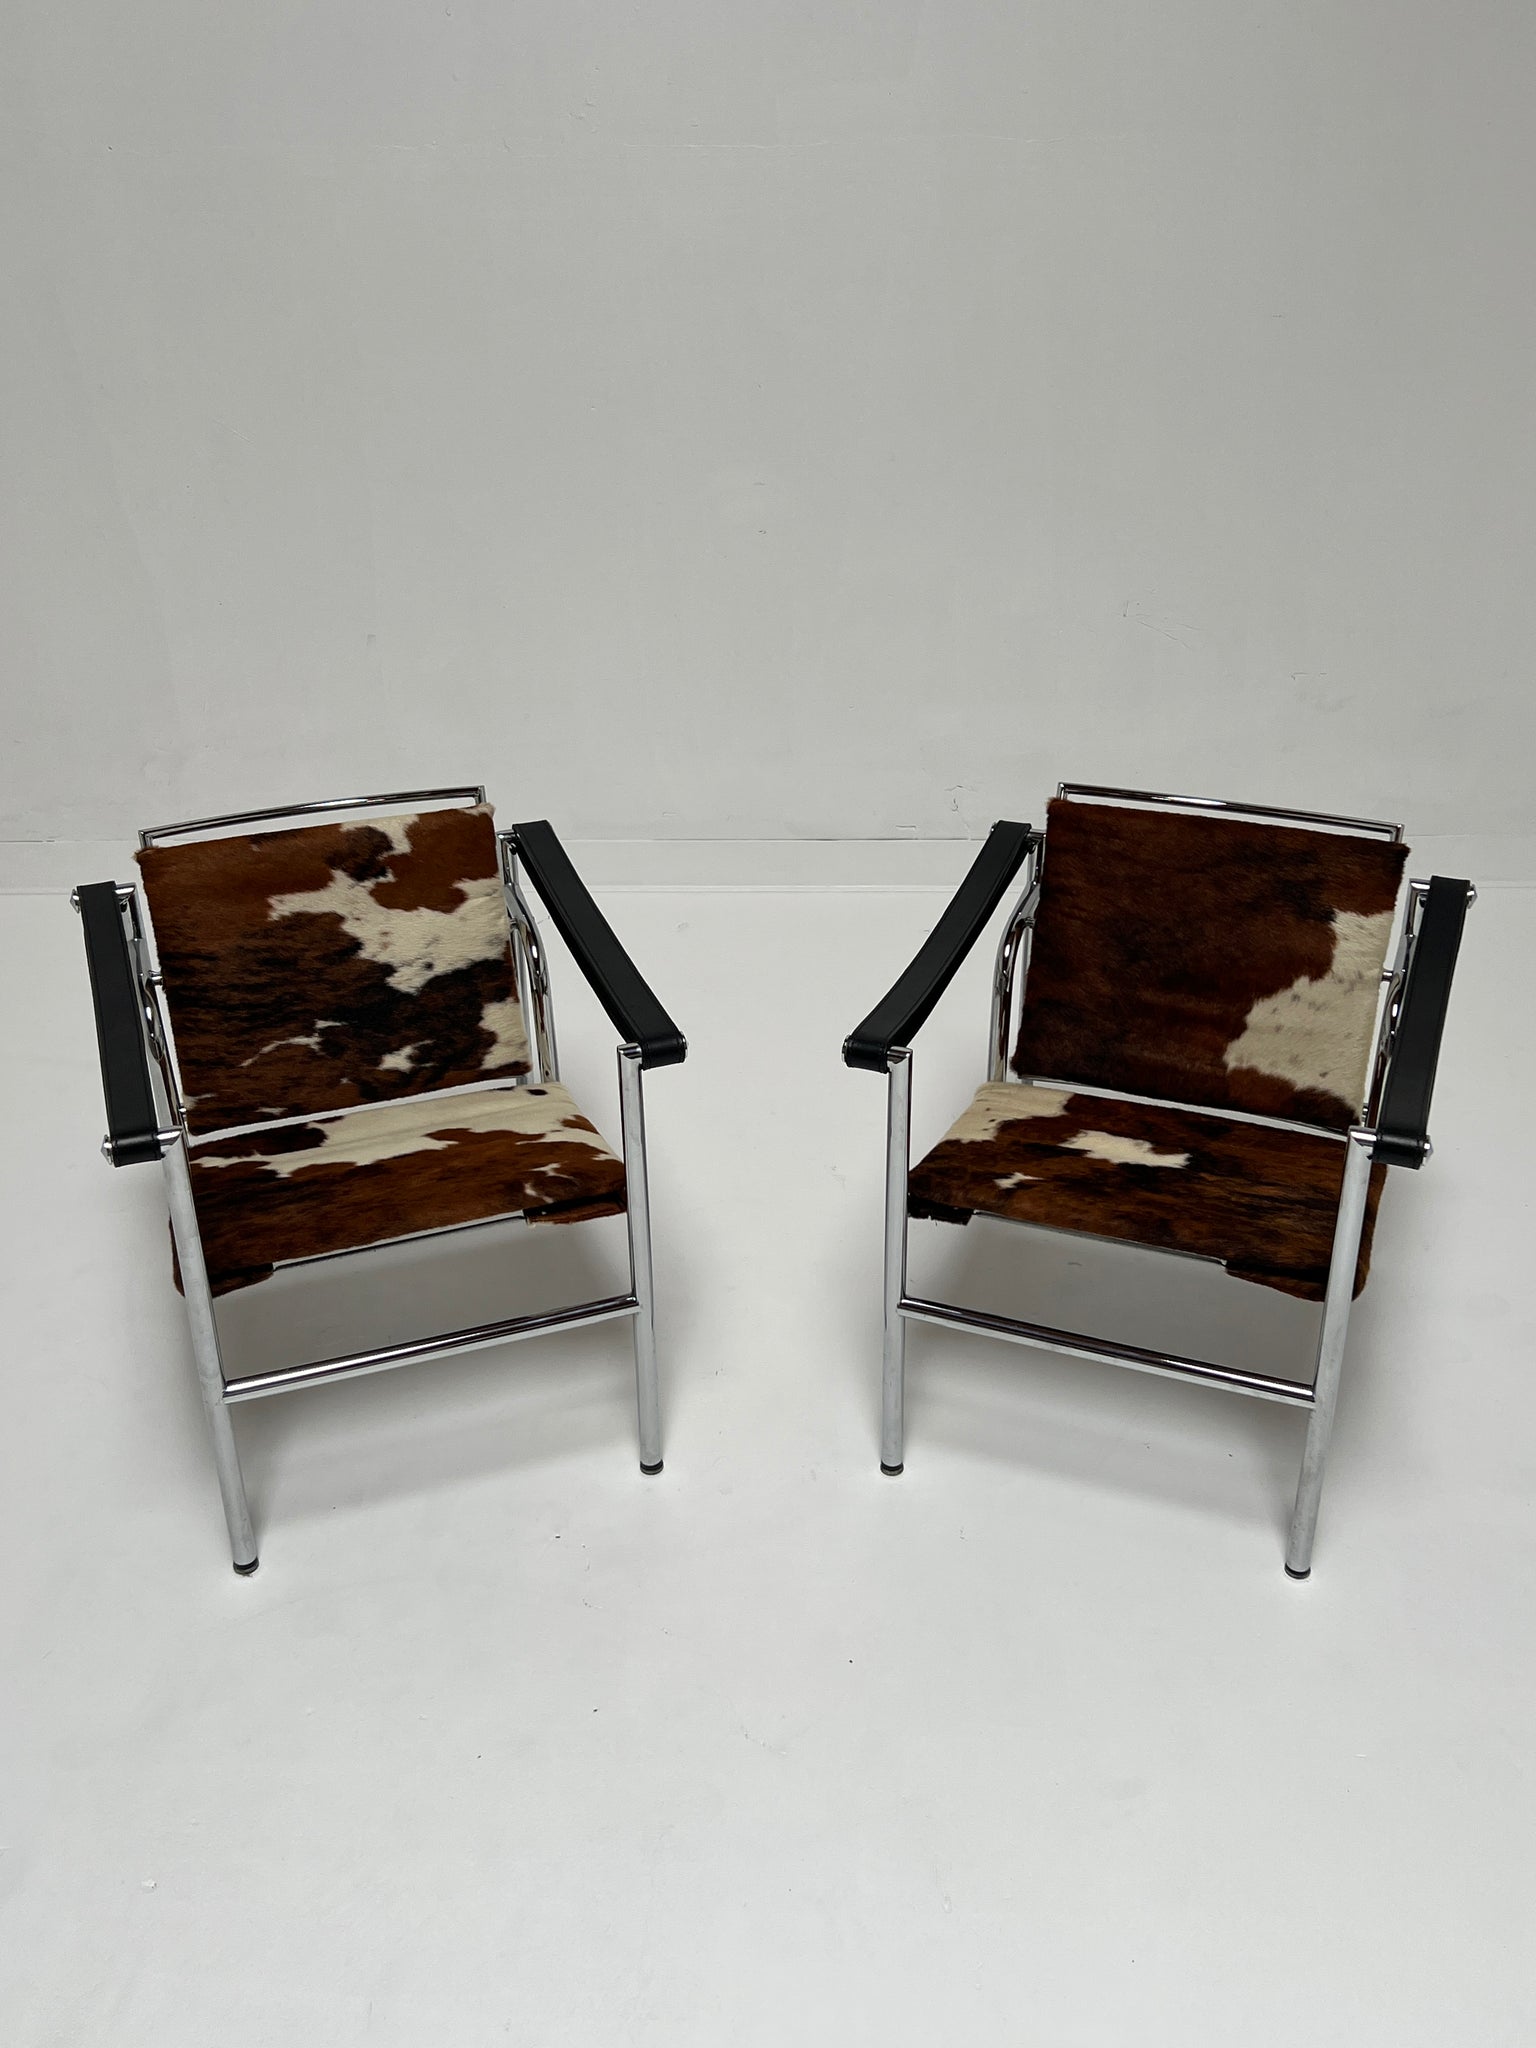 Lc1 Cowhide Sling Chairs by Design Within Reach